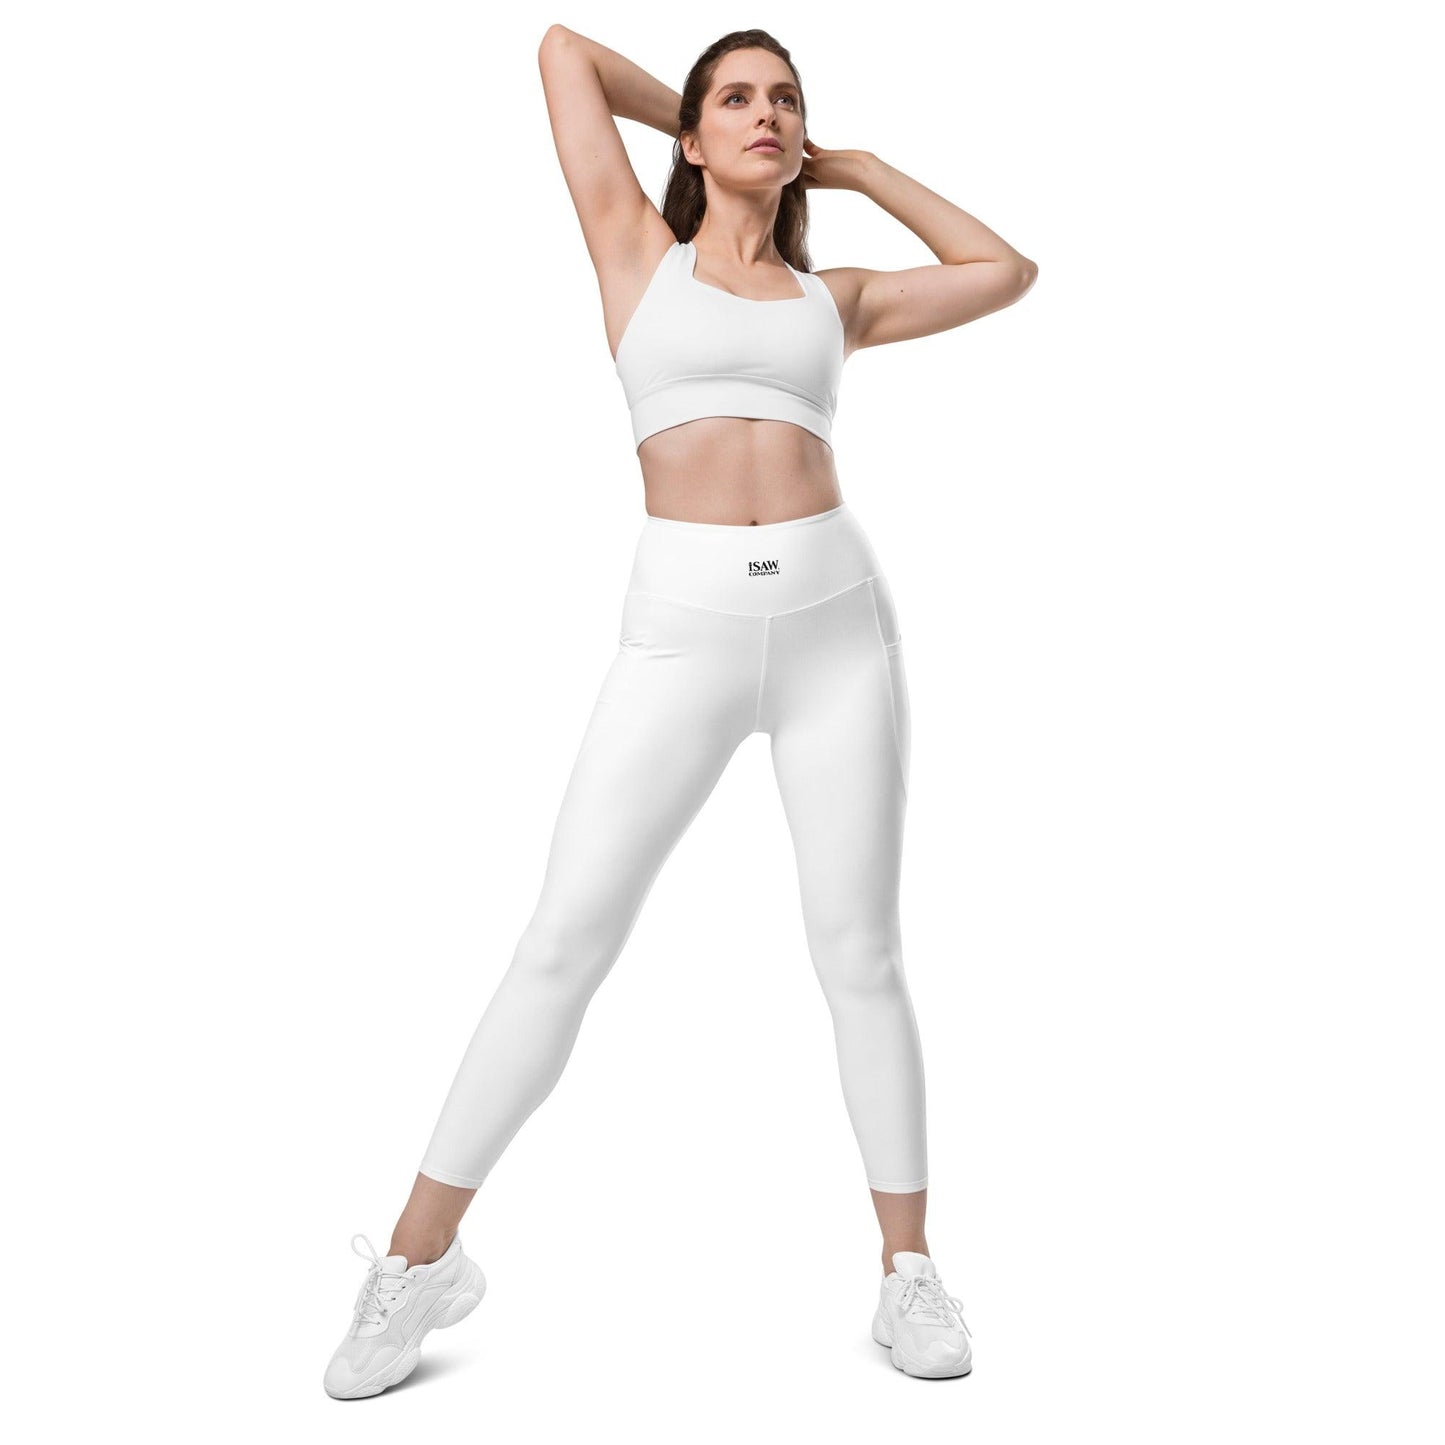 iSAW Womens White Leggings with Pockets - iSAW Company